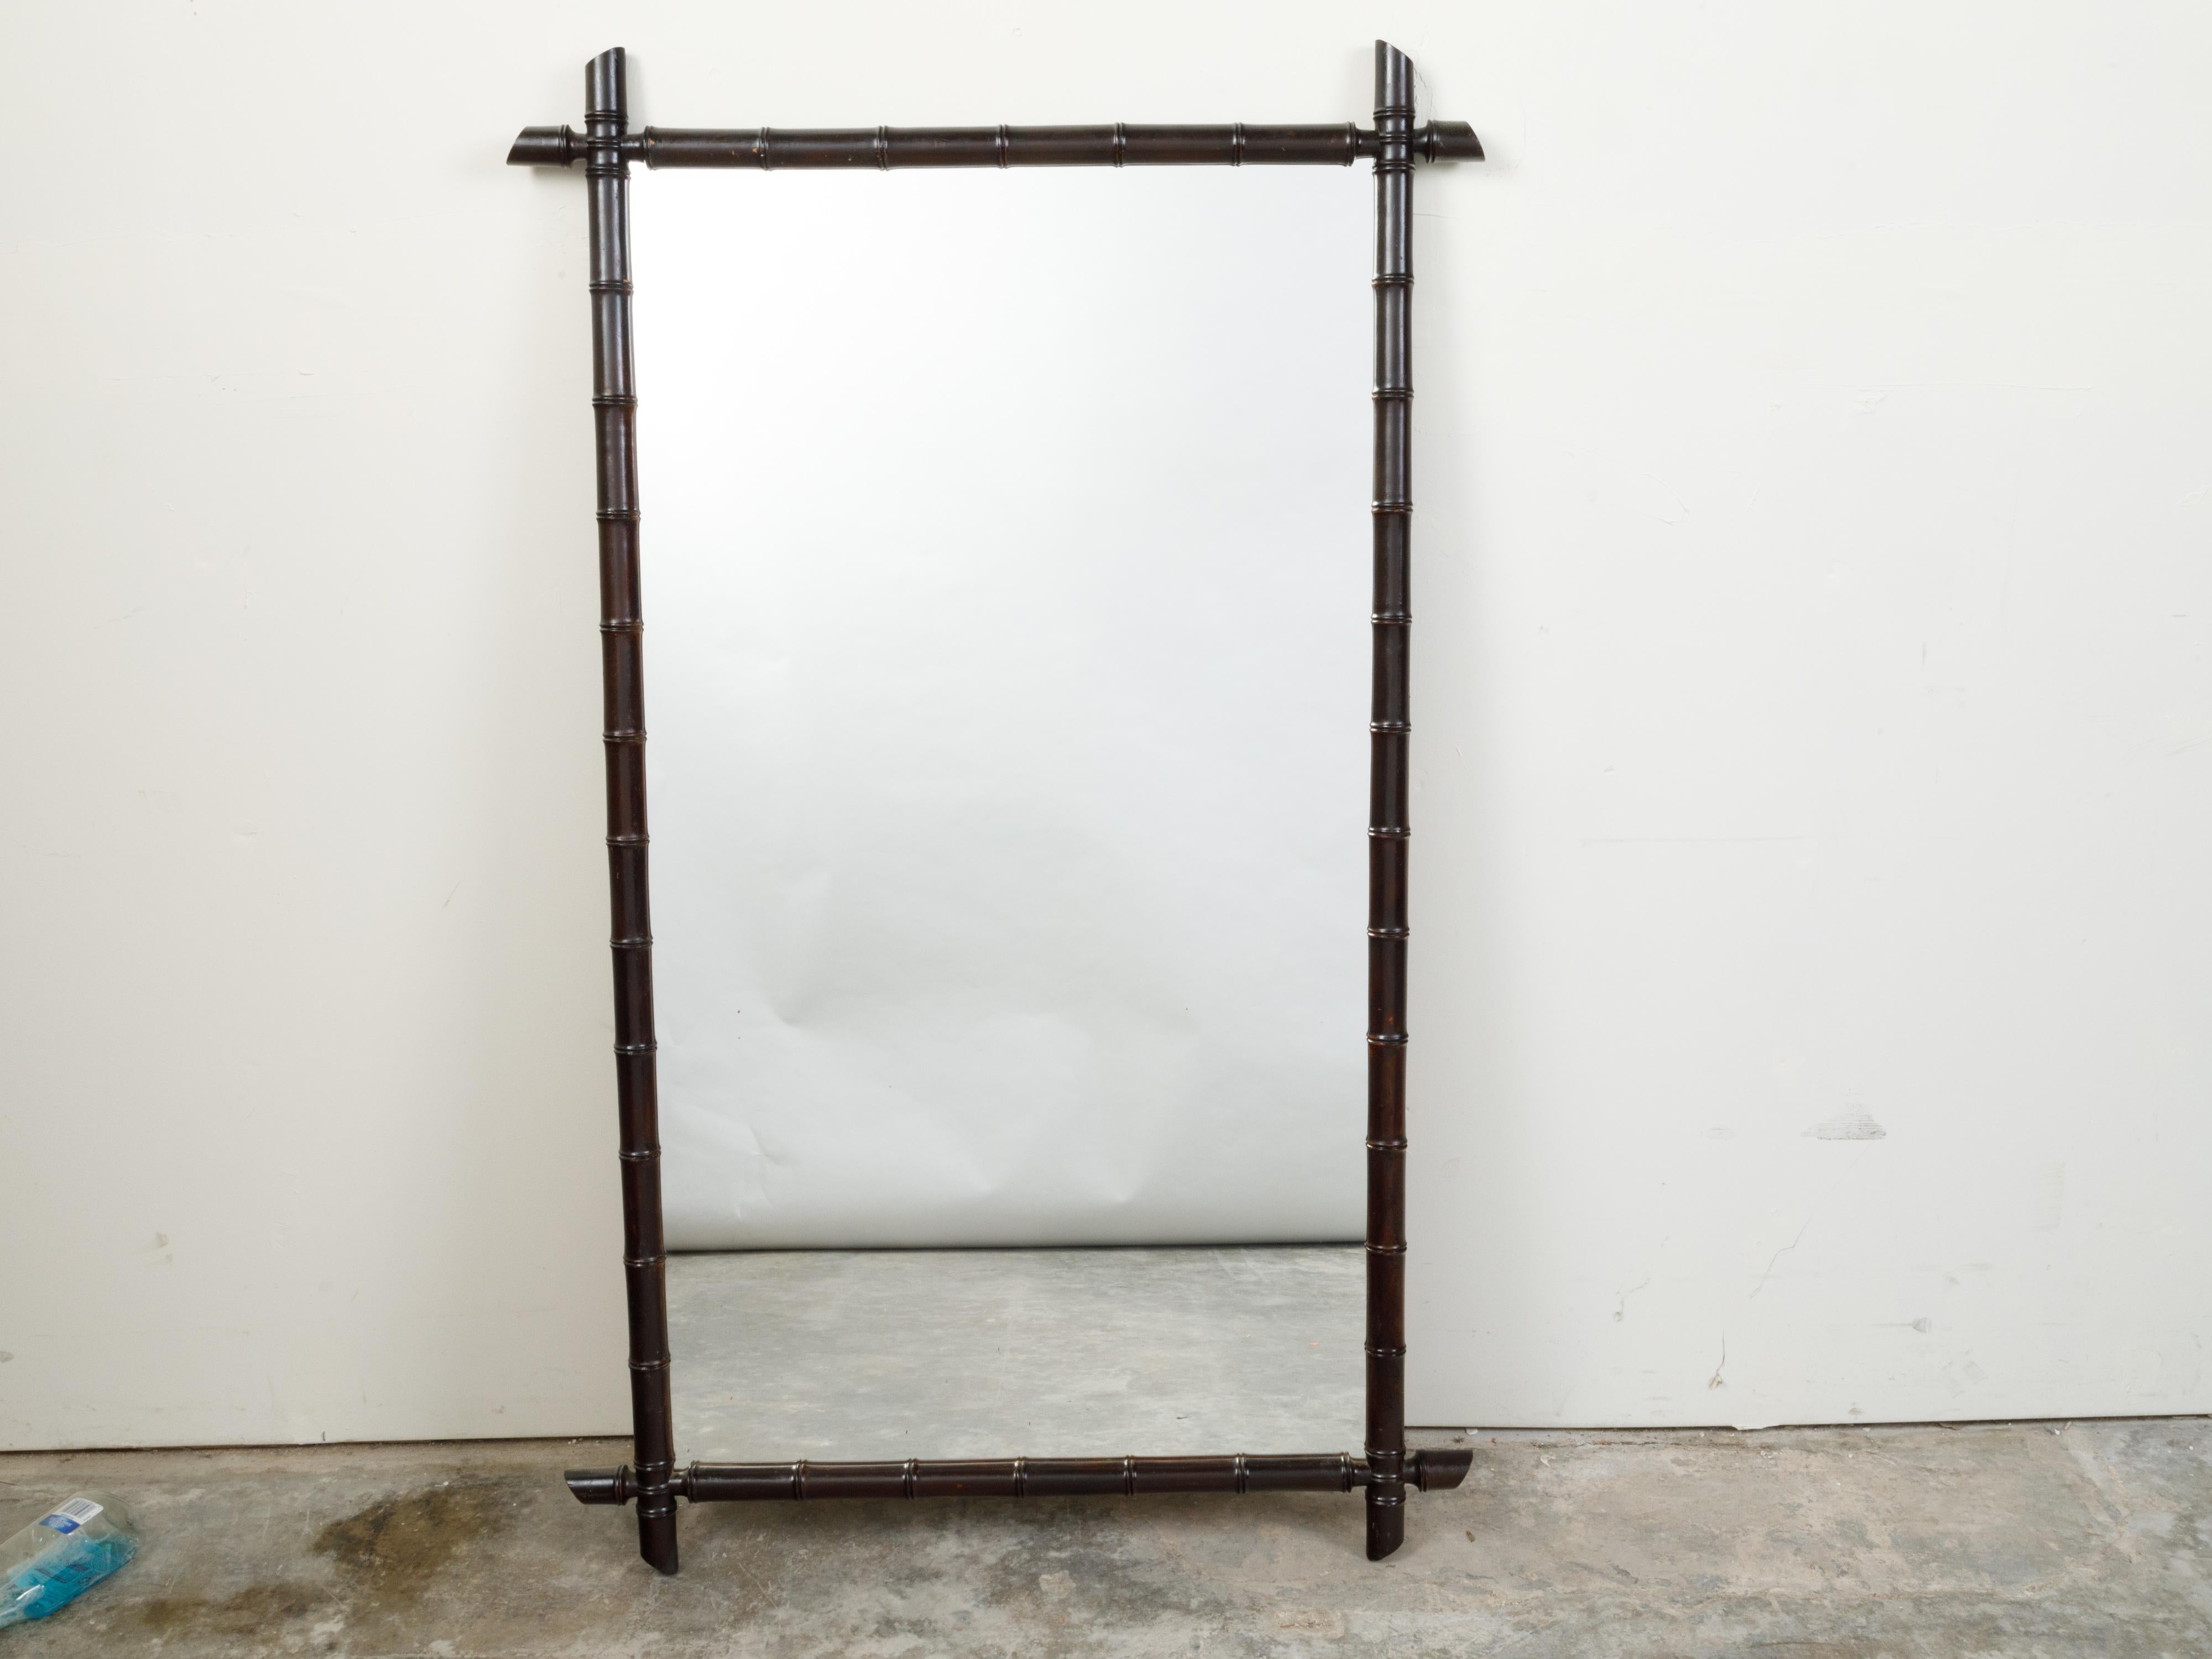 A French rectangular faux-bamboo mirror from the early 20th century, with black patina. Created in France during the Turn of the Century, this rustic mirror features a rectangular silhouette made of a thin black bamboo frame showcasing intersecting